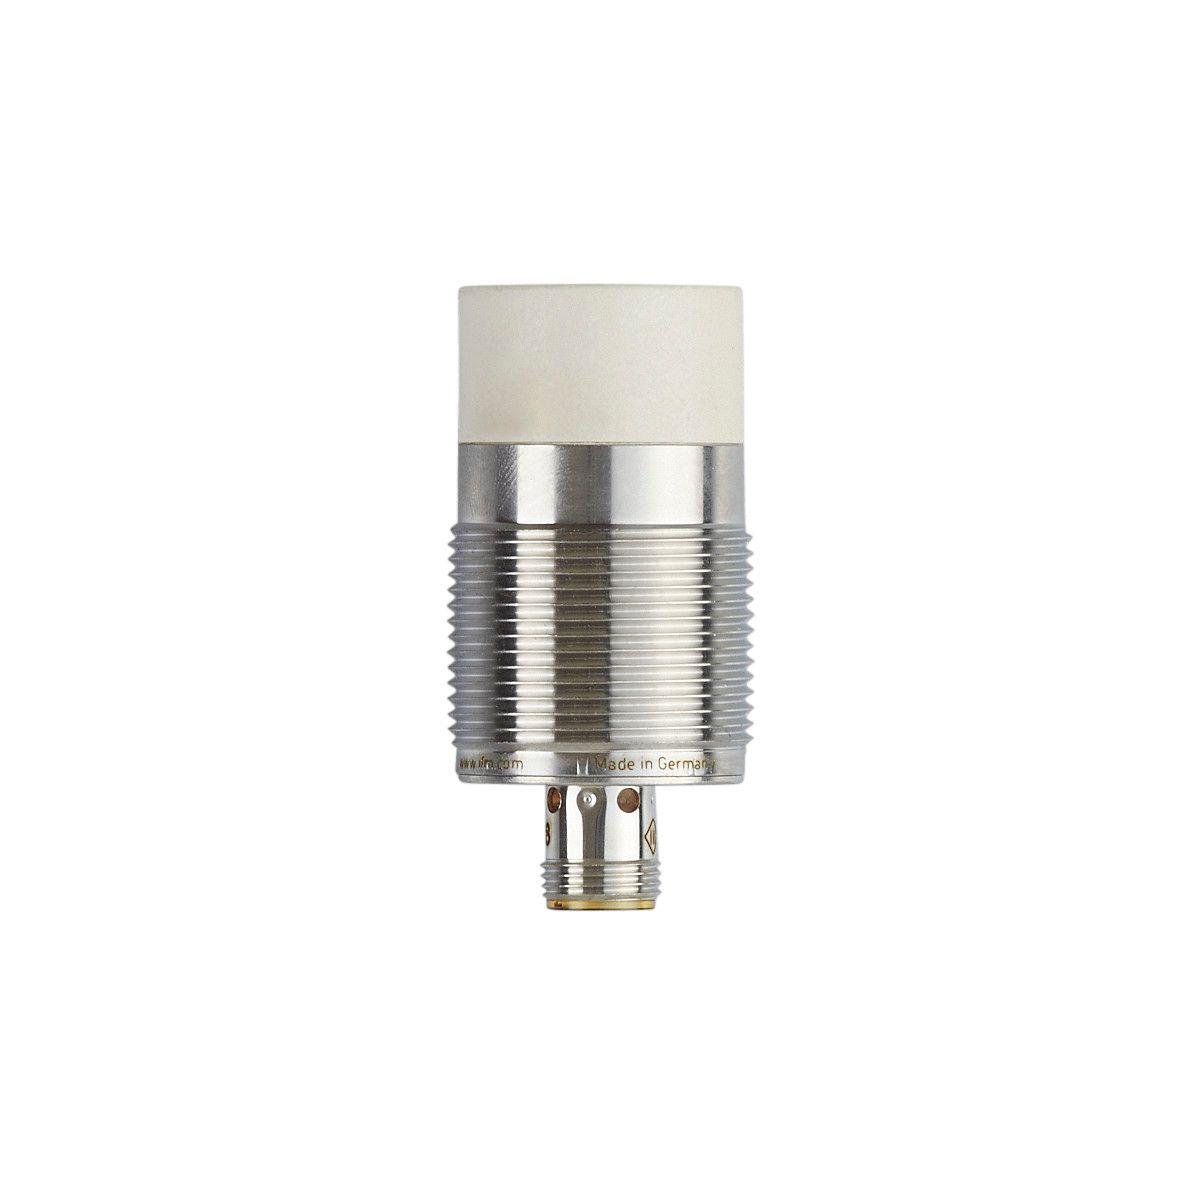 ifm Electronic IIS284 Inductive sensor, Suitable for industrial, mobile, cooling and lubricating applications, Electrical design: PNP, Output function: normally open, Sensing range [mm]: 30, Housing: Threaded type, Dimensions [mm]: M30 x 1.5 / L = 60, System: gold-plated conta